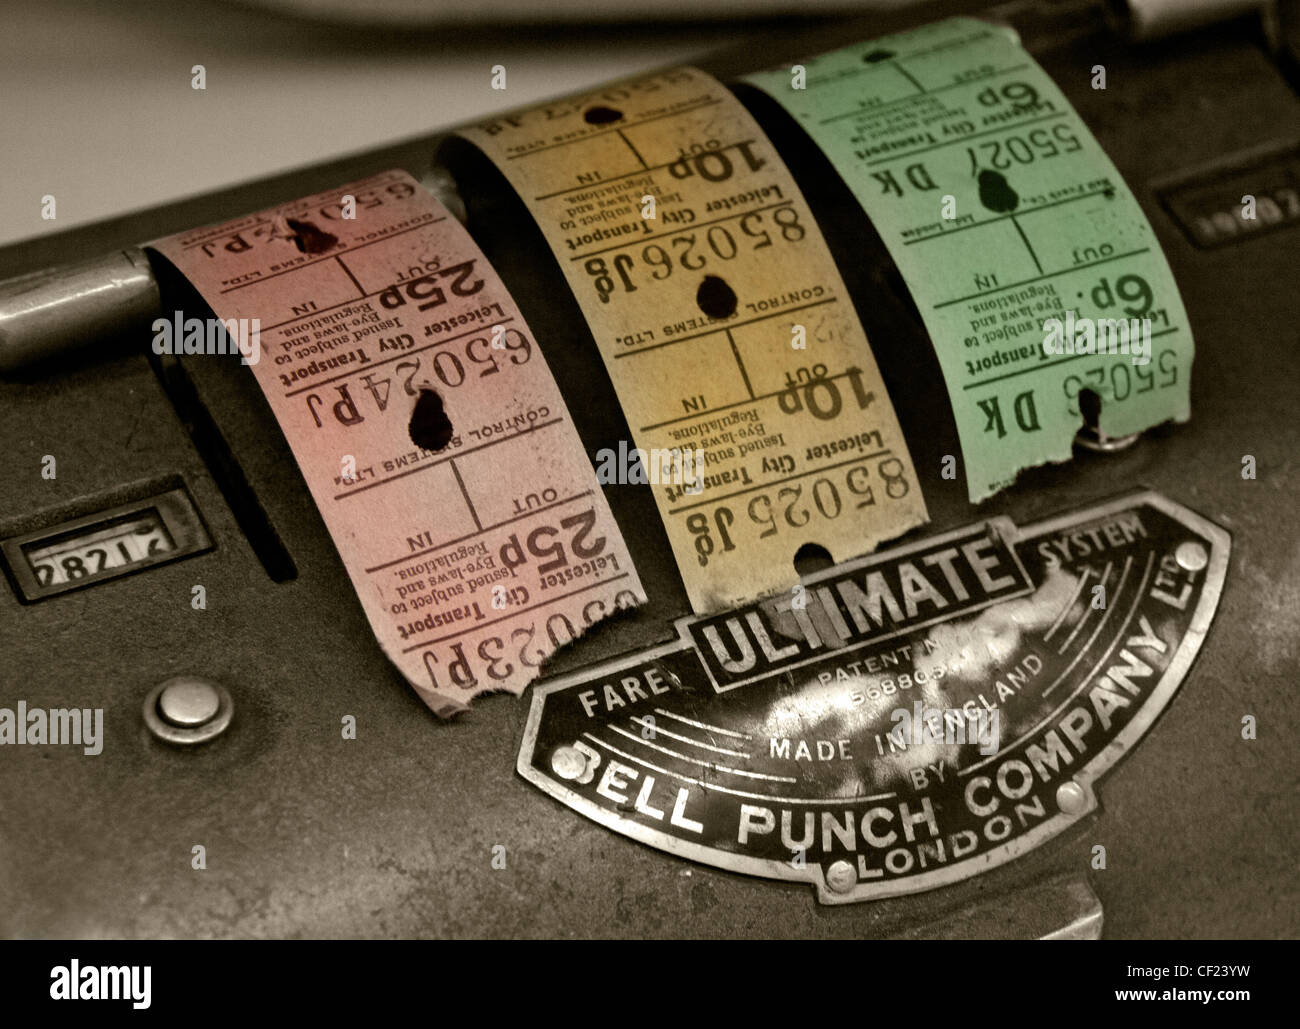 Ultimate Bell Punch Company Bus Ticket Machine with coloured tickets Made in England Stock Photo